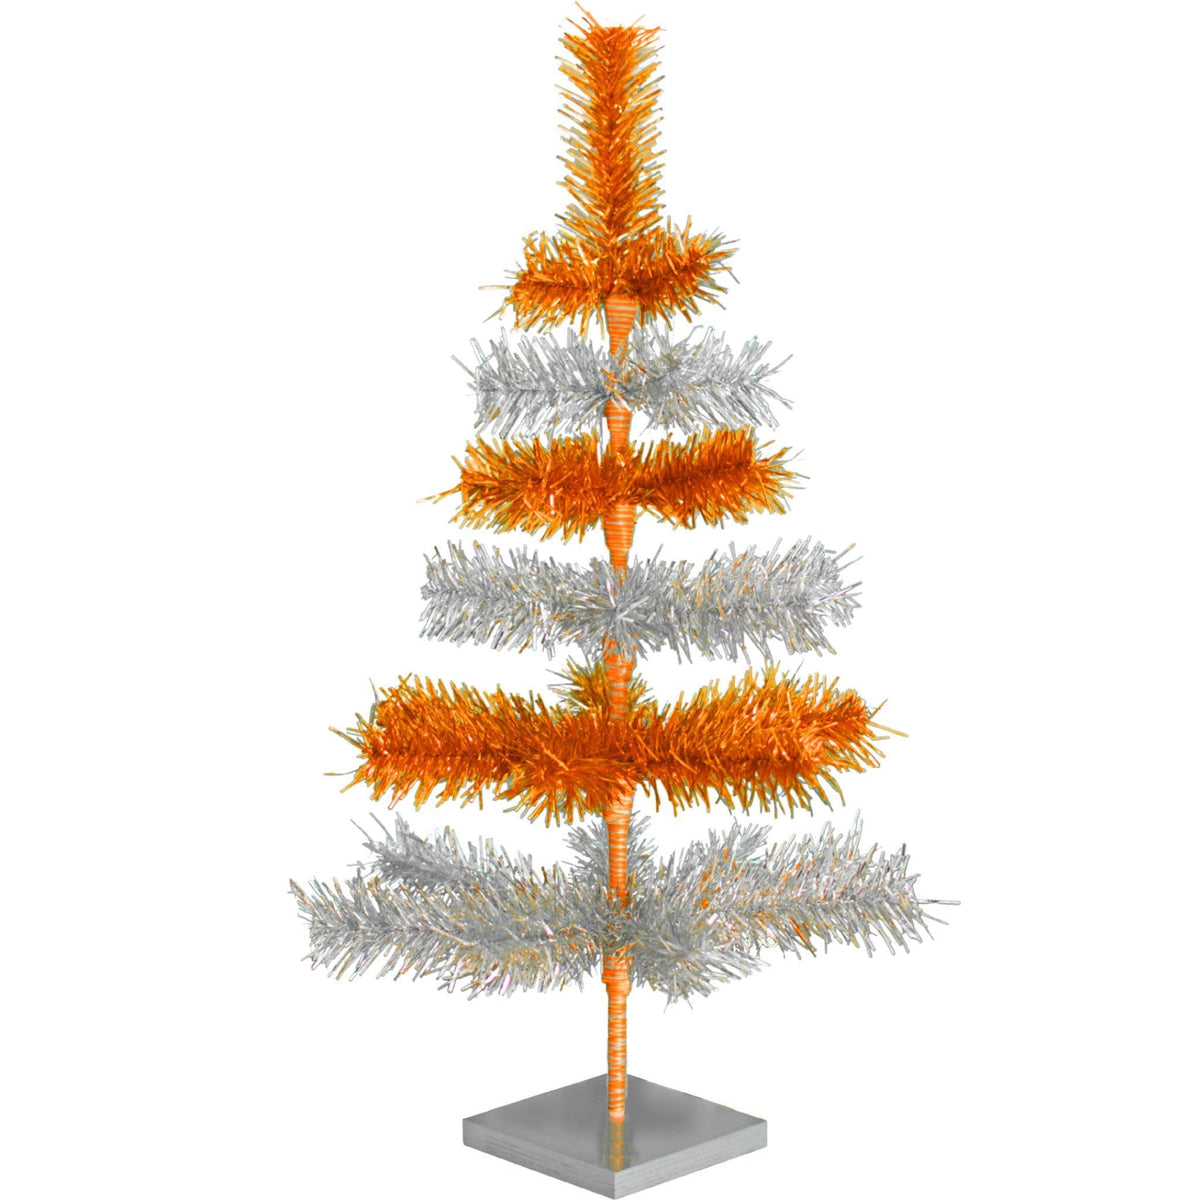 Orange & Silver Layered Tinsel Christmas Trees!    Decorate for the holidays with a Shiny Orange and Metallic Silver retro-style Christmas Tree.  On sale now at leedisplay.com